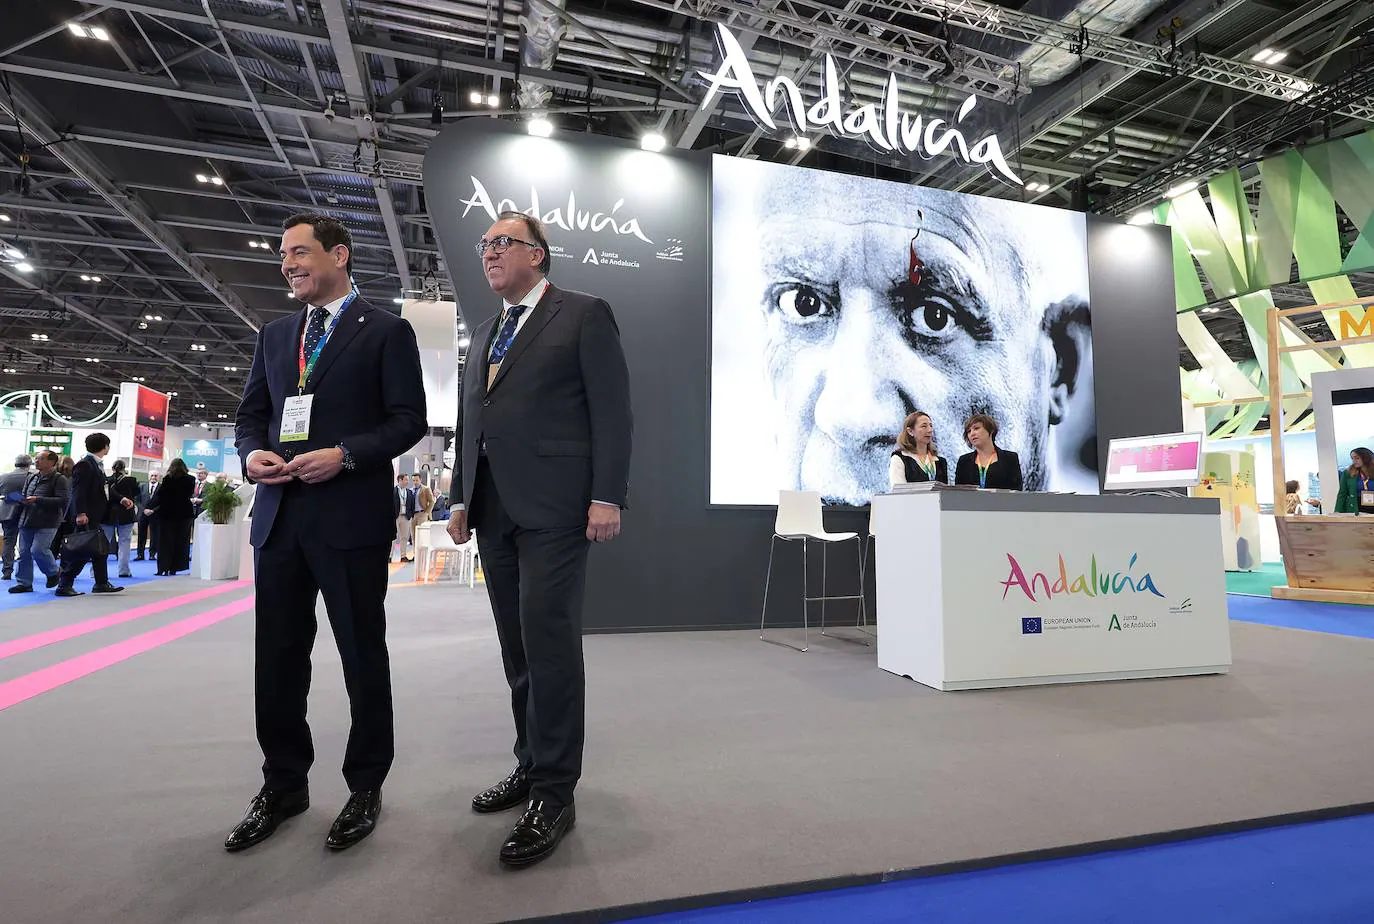 Moreno and BErnal on the Andalucía stand at London's Exceñ cemtre.